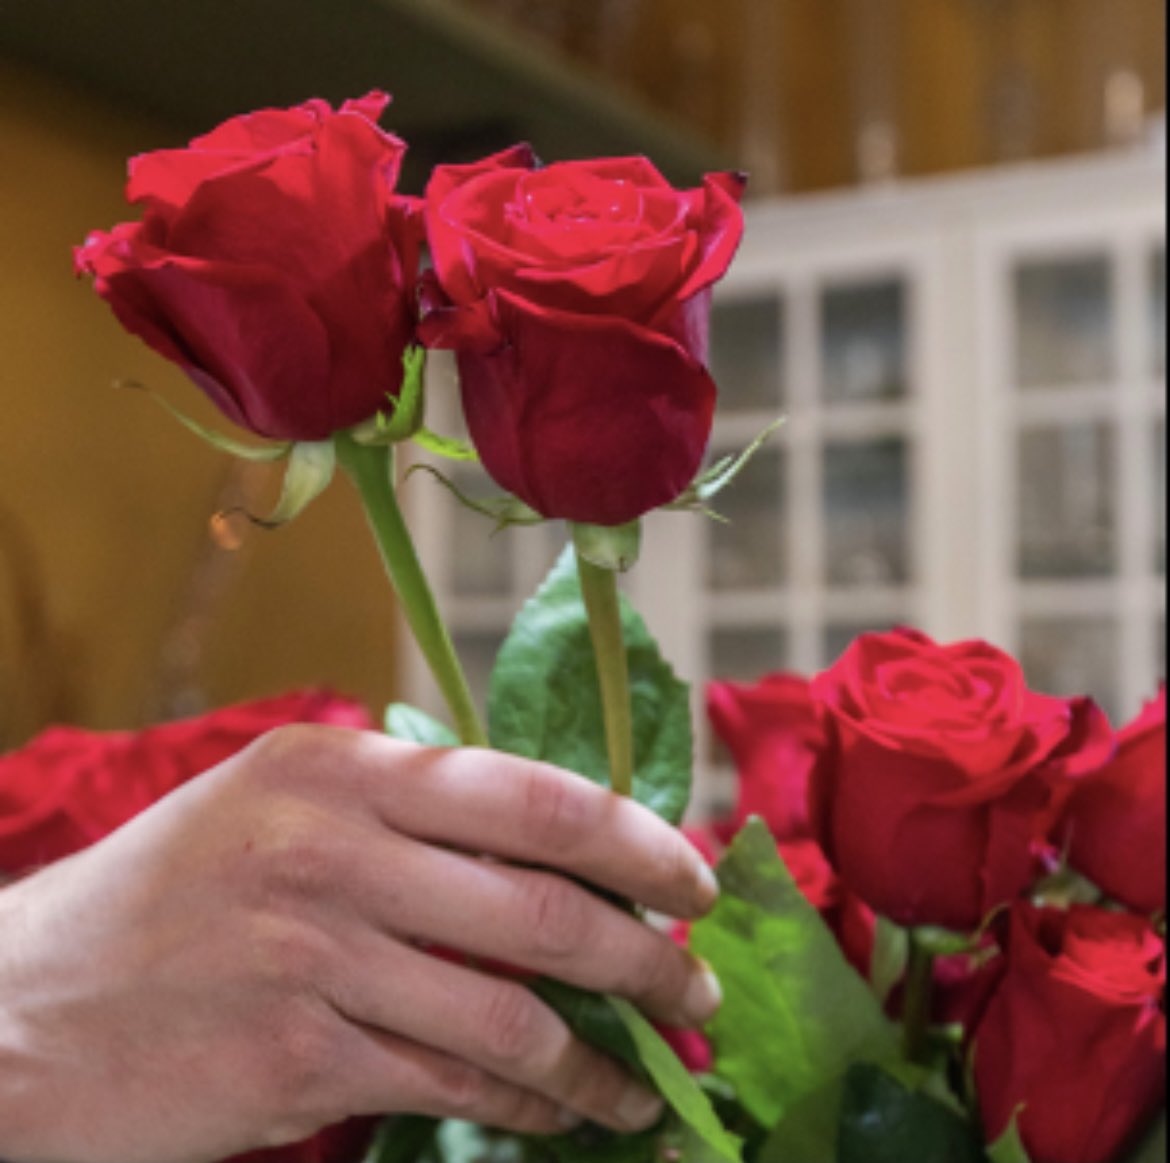 The #RoseBowl Game: best enjoyed with a vase of @ftdflowers 🌹 bit.ly/3BbeoOd